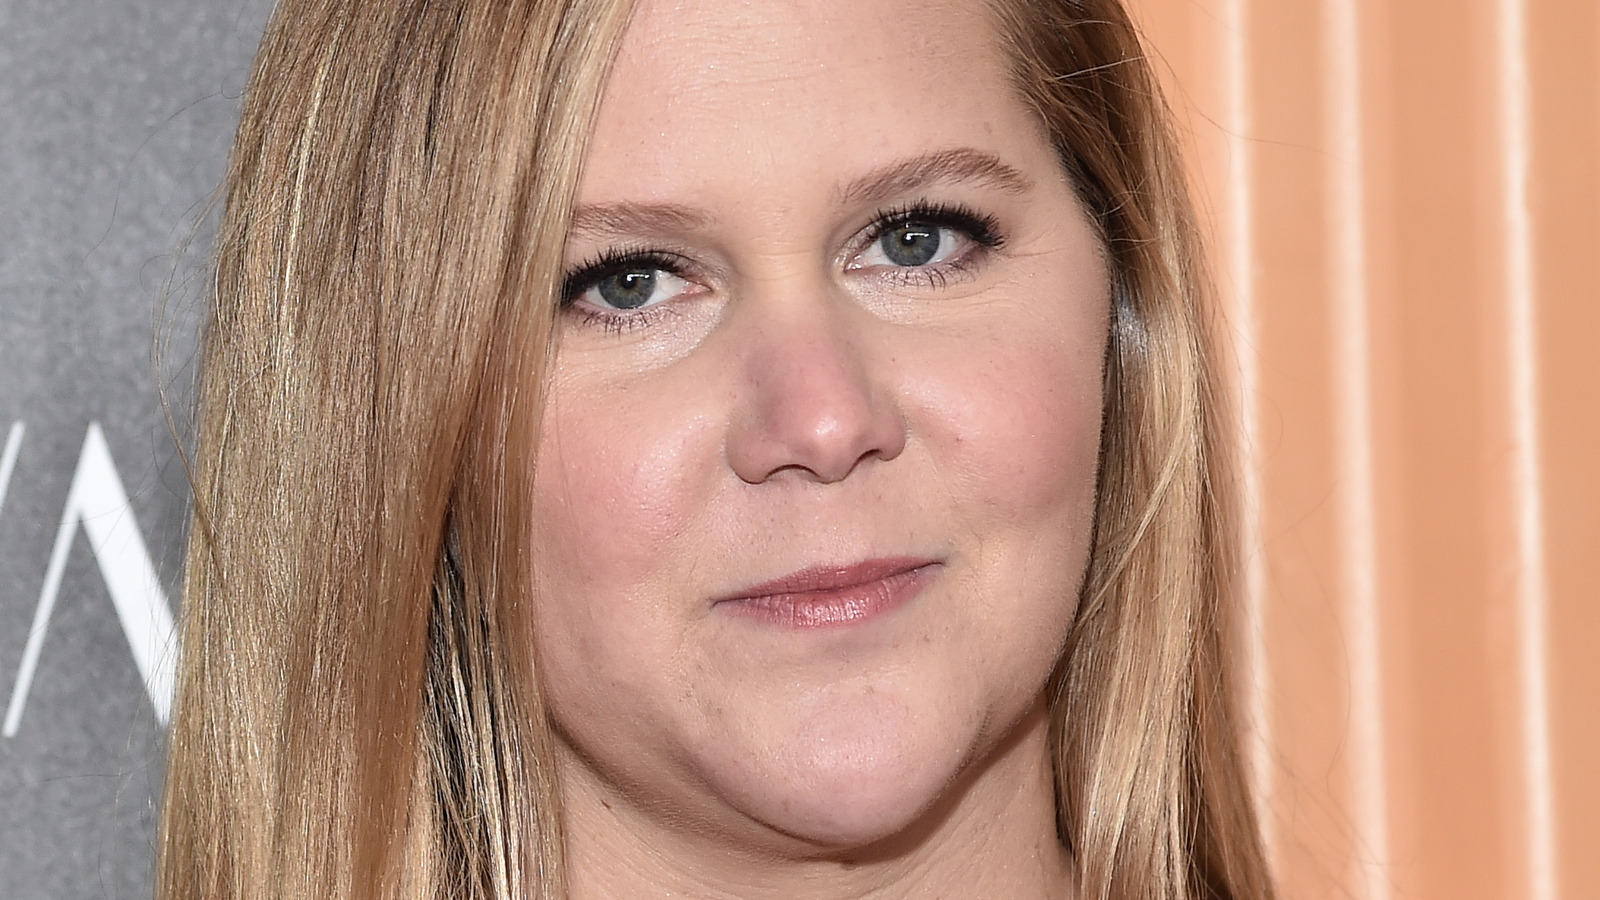 Amy Schumer Blowjob - What You Don't Know About Amy Schumer